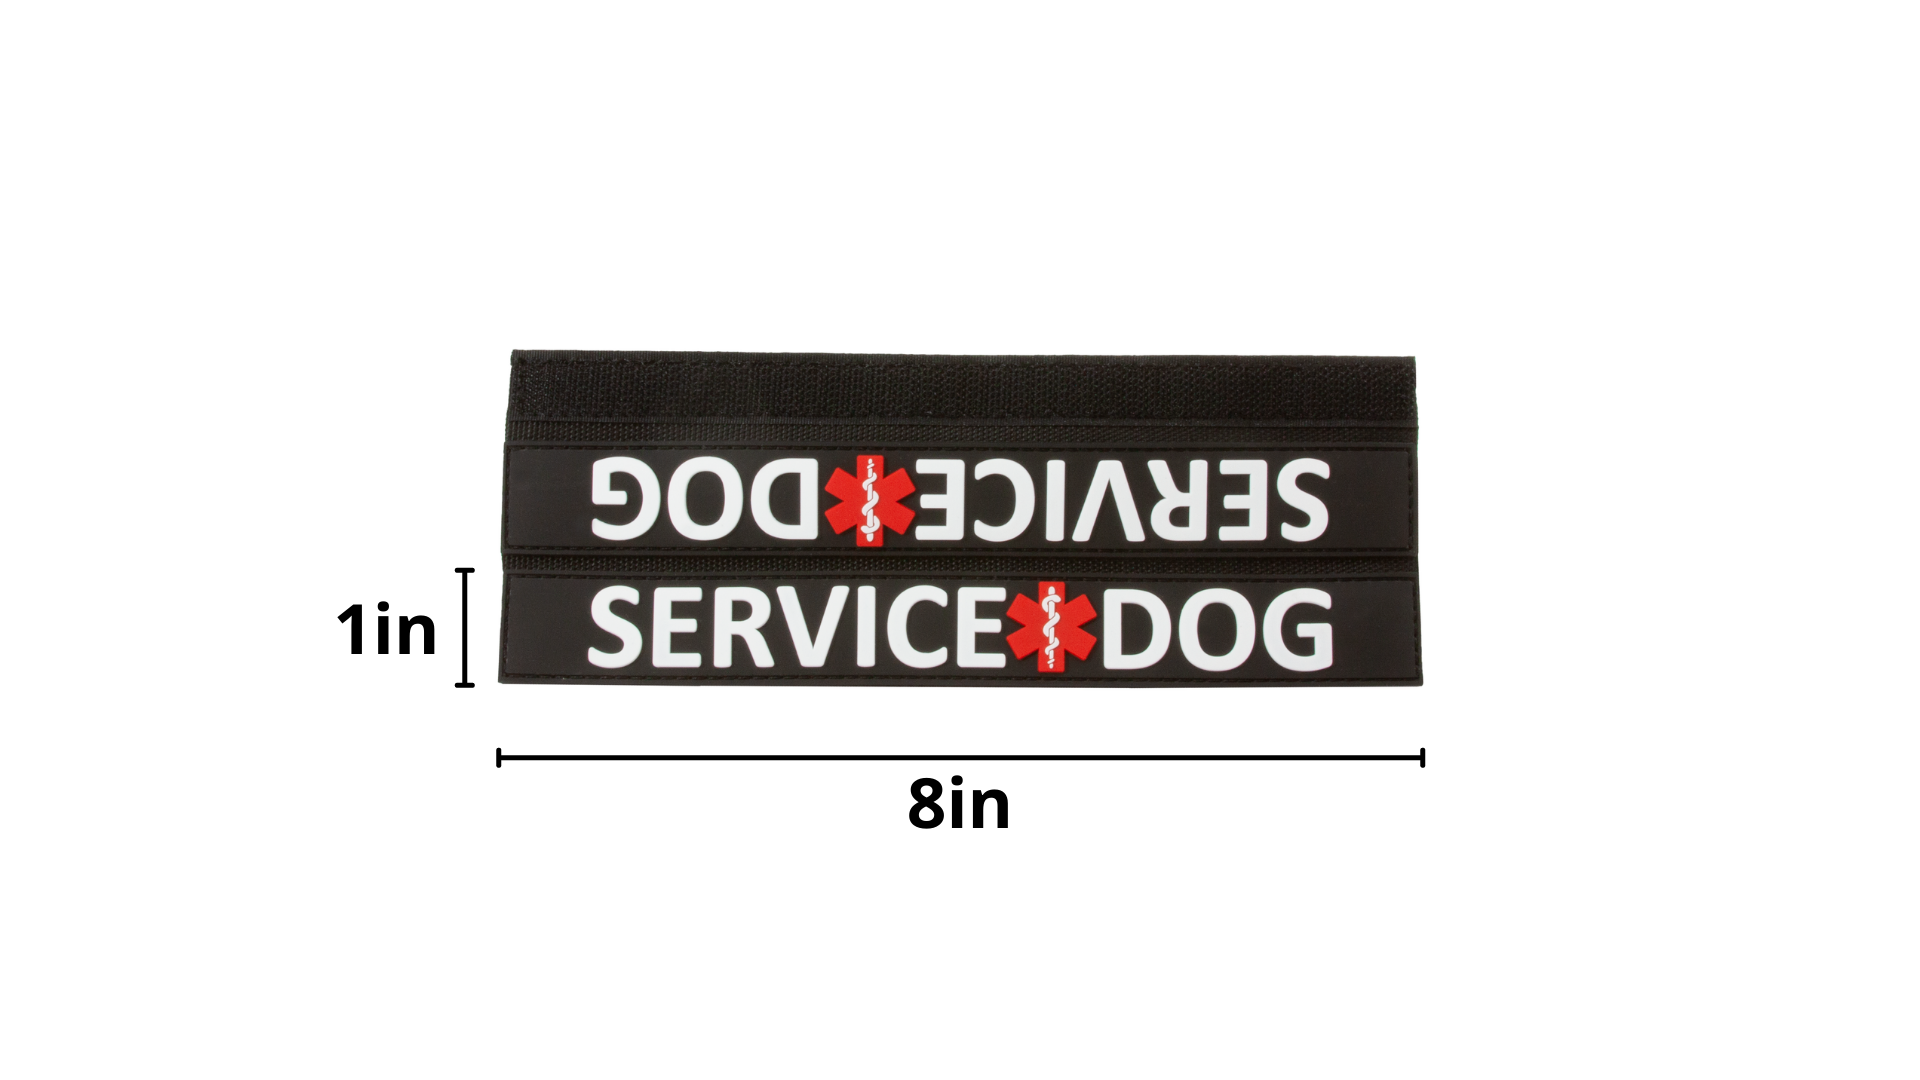 Service dog leash sleeve, working dogs, reactive dogs, training dogs, dogs that need space.